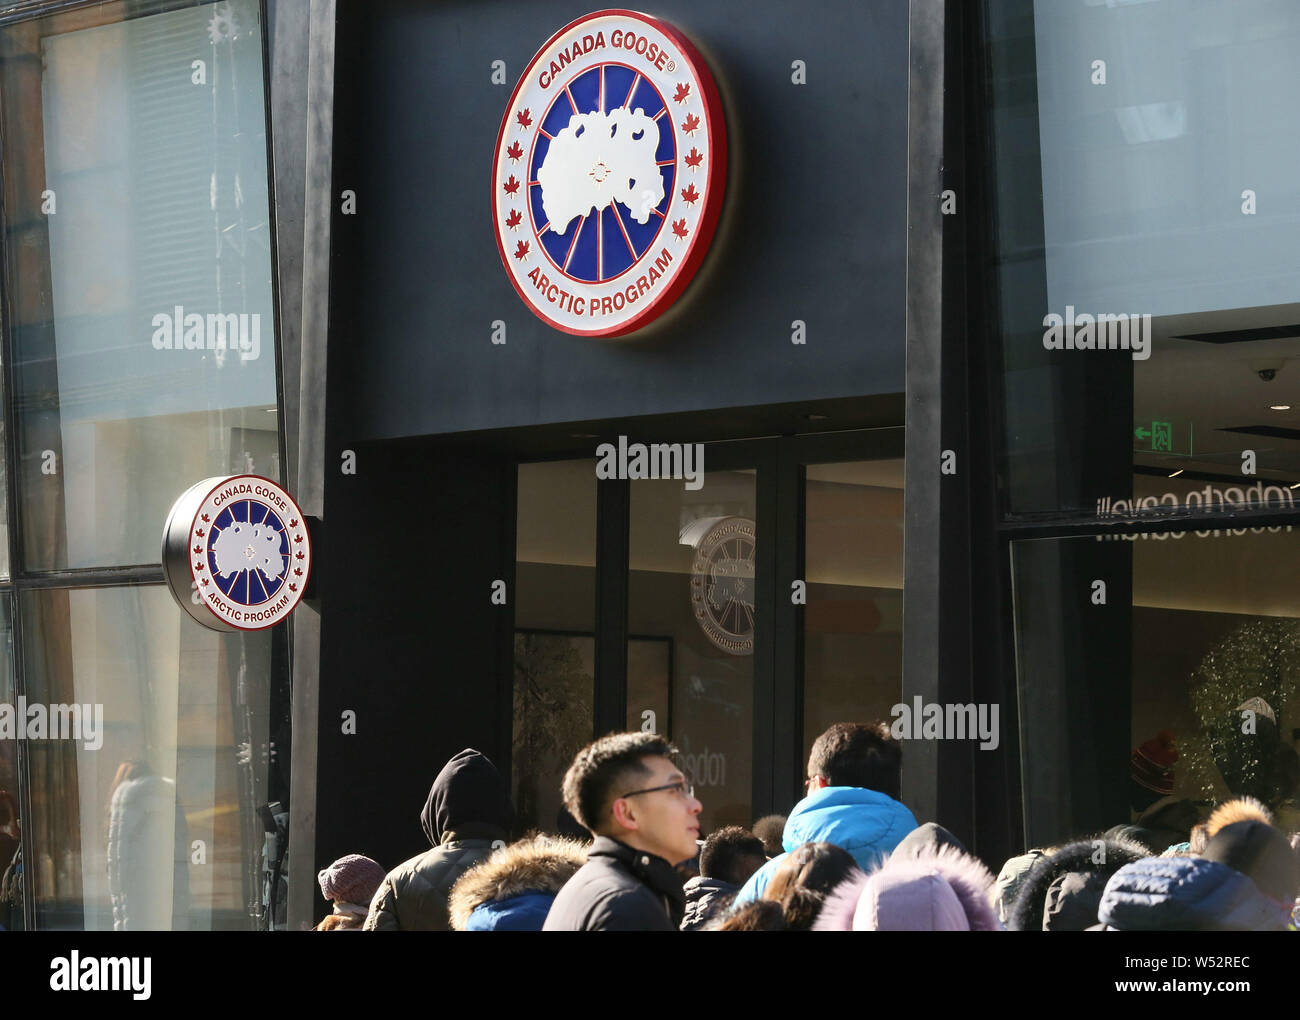 FILE--Customers queue up in front of the flagship store of Canada Goose at  the Taikoo Li Sanlitun shopping center in Beijing, China, 1 January 2019  Stock Photo - Alamy